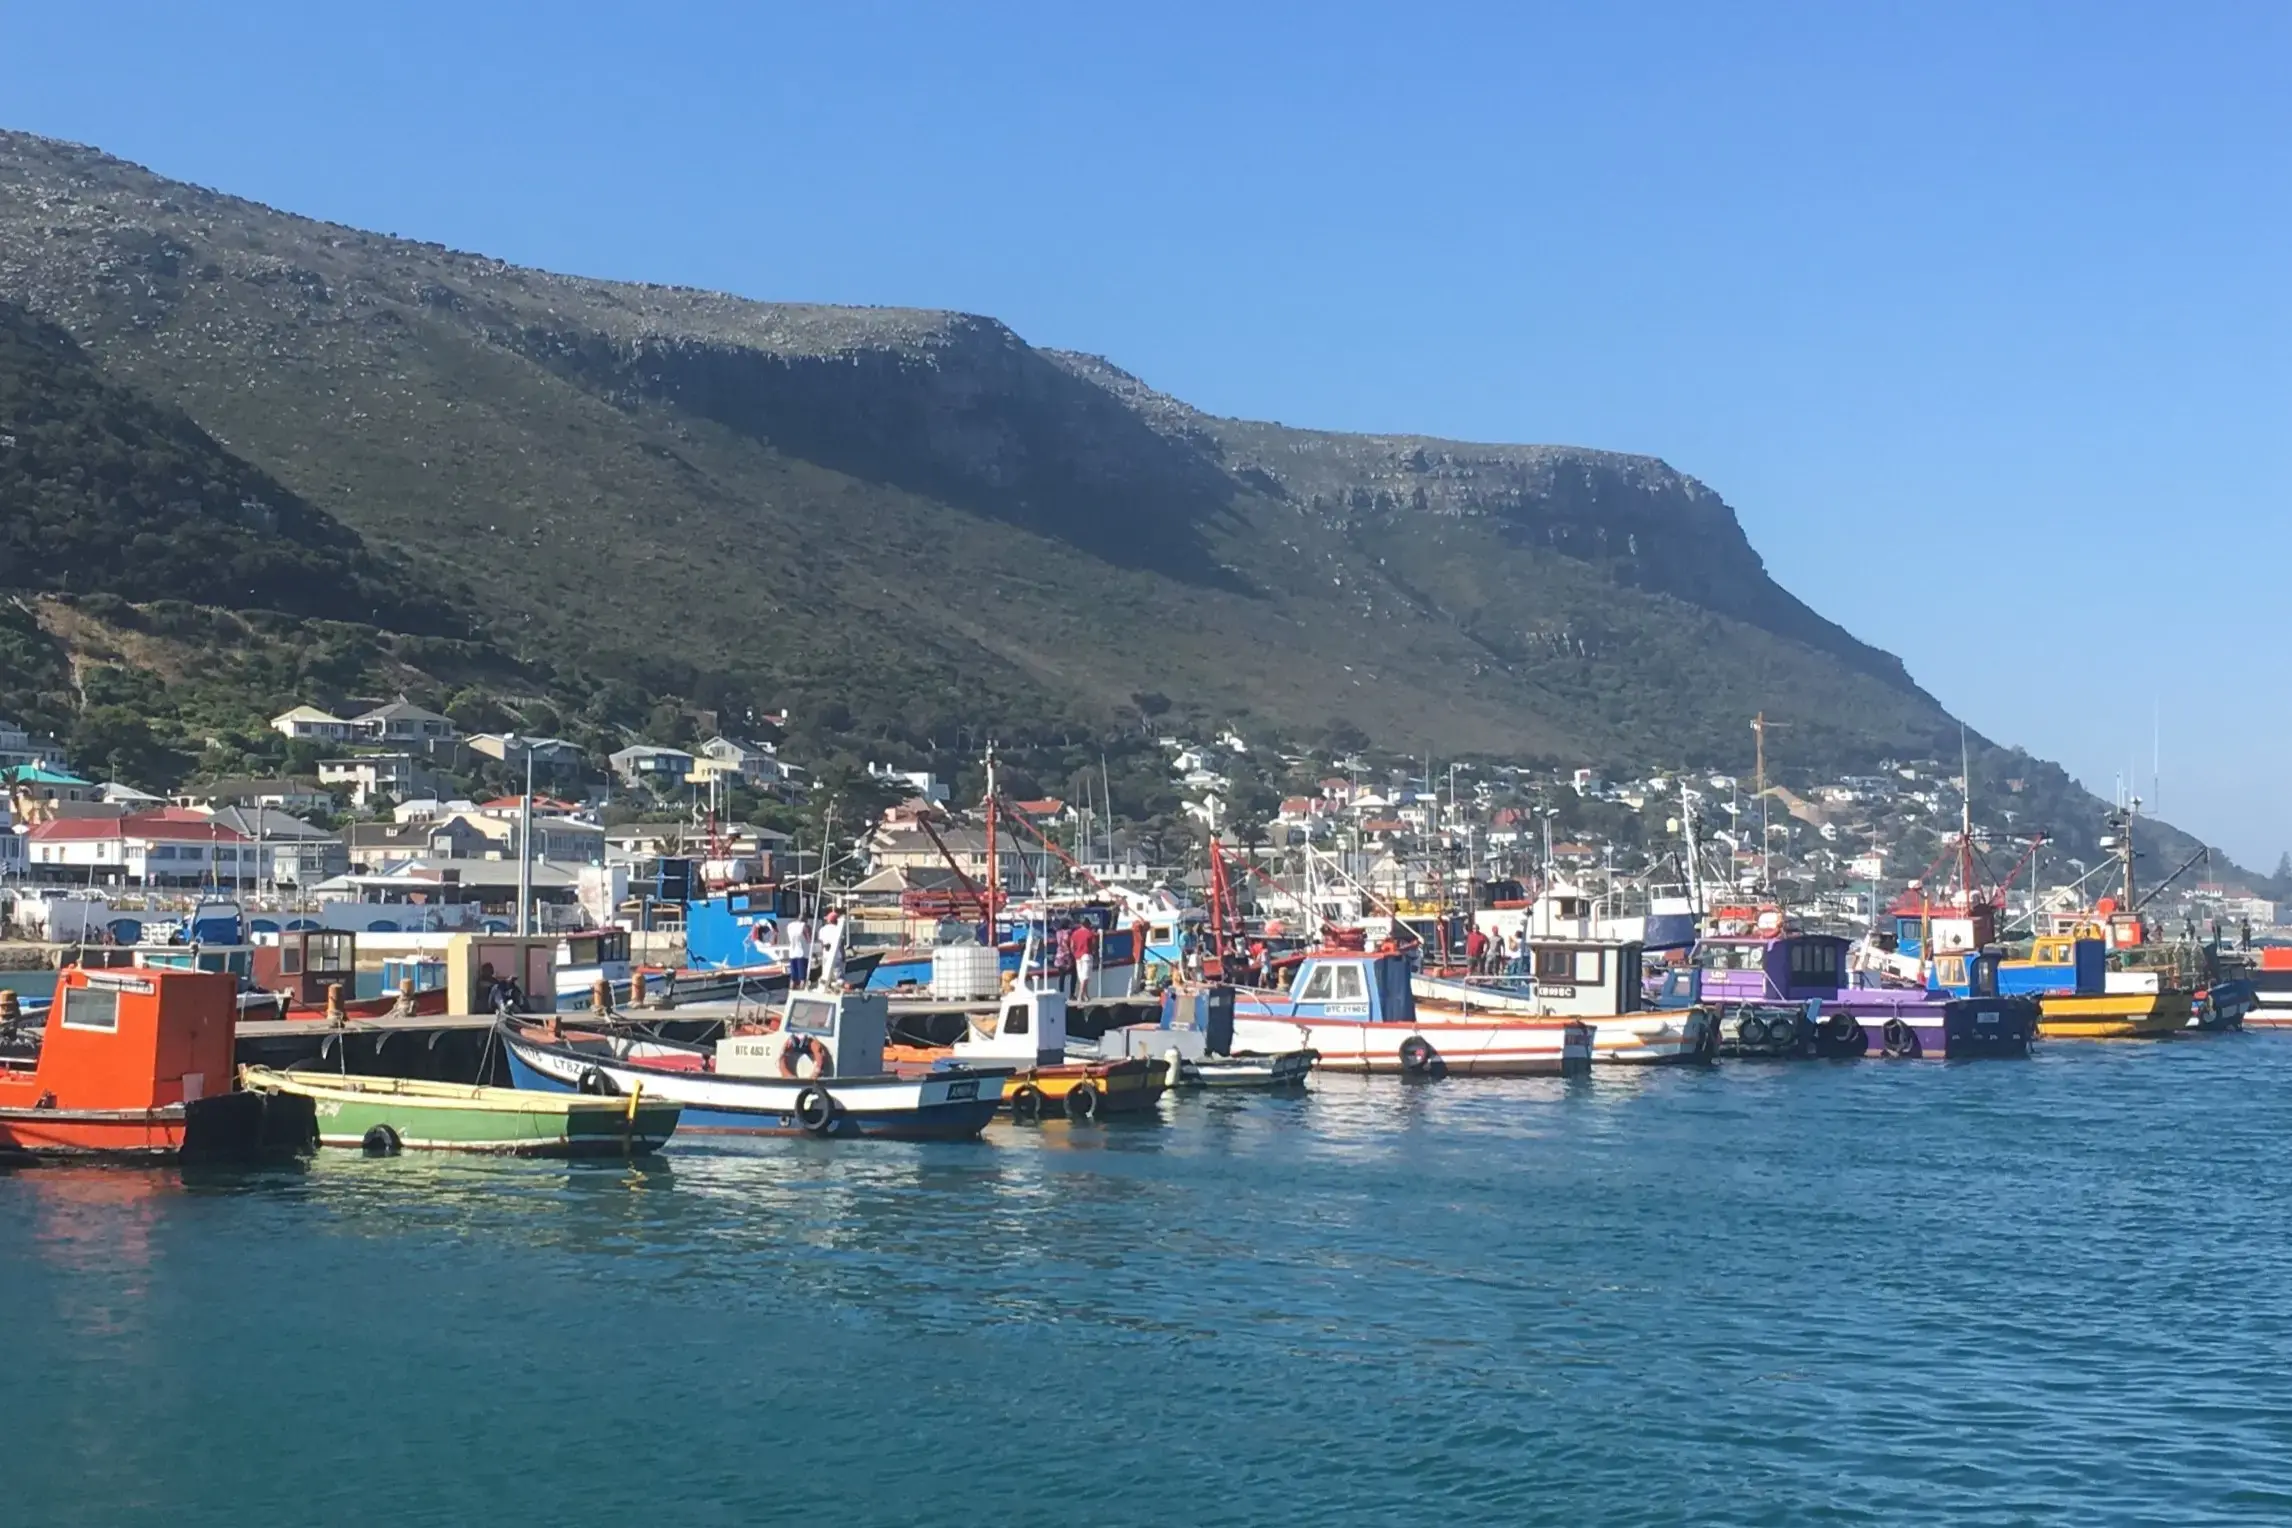 Fishing boats line the shores of Kalk Bay